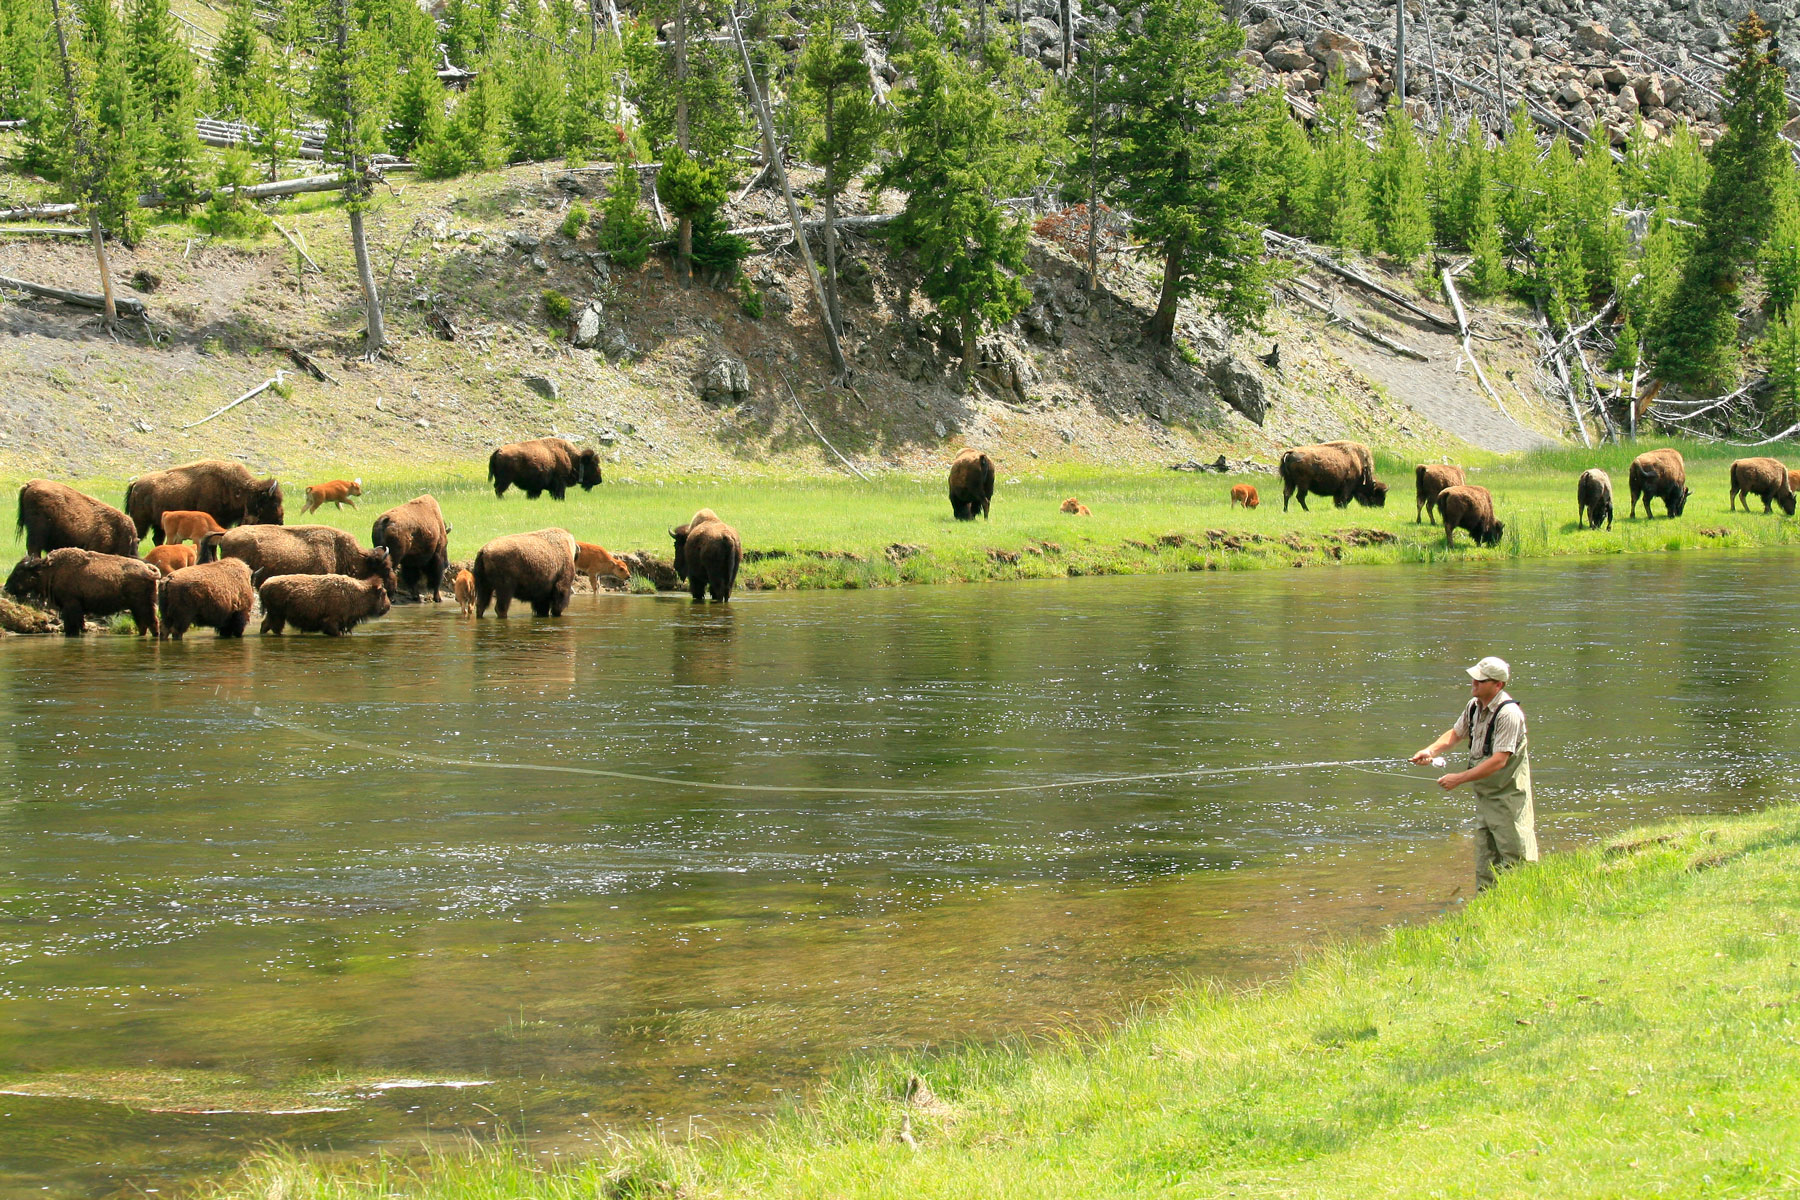 Man fishing in river with bison roaming in the background